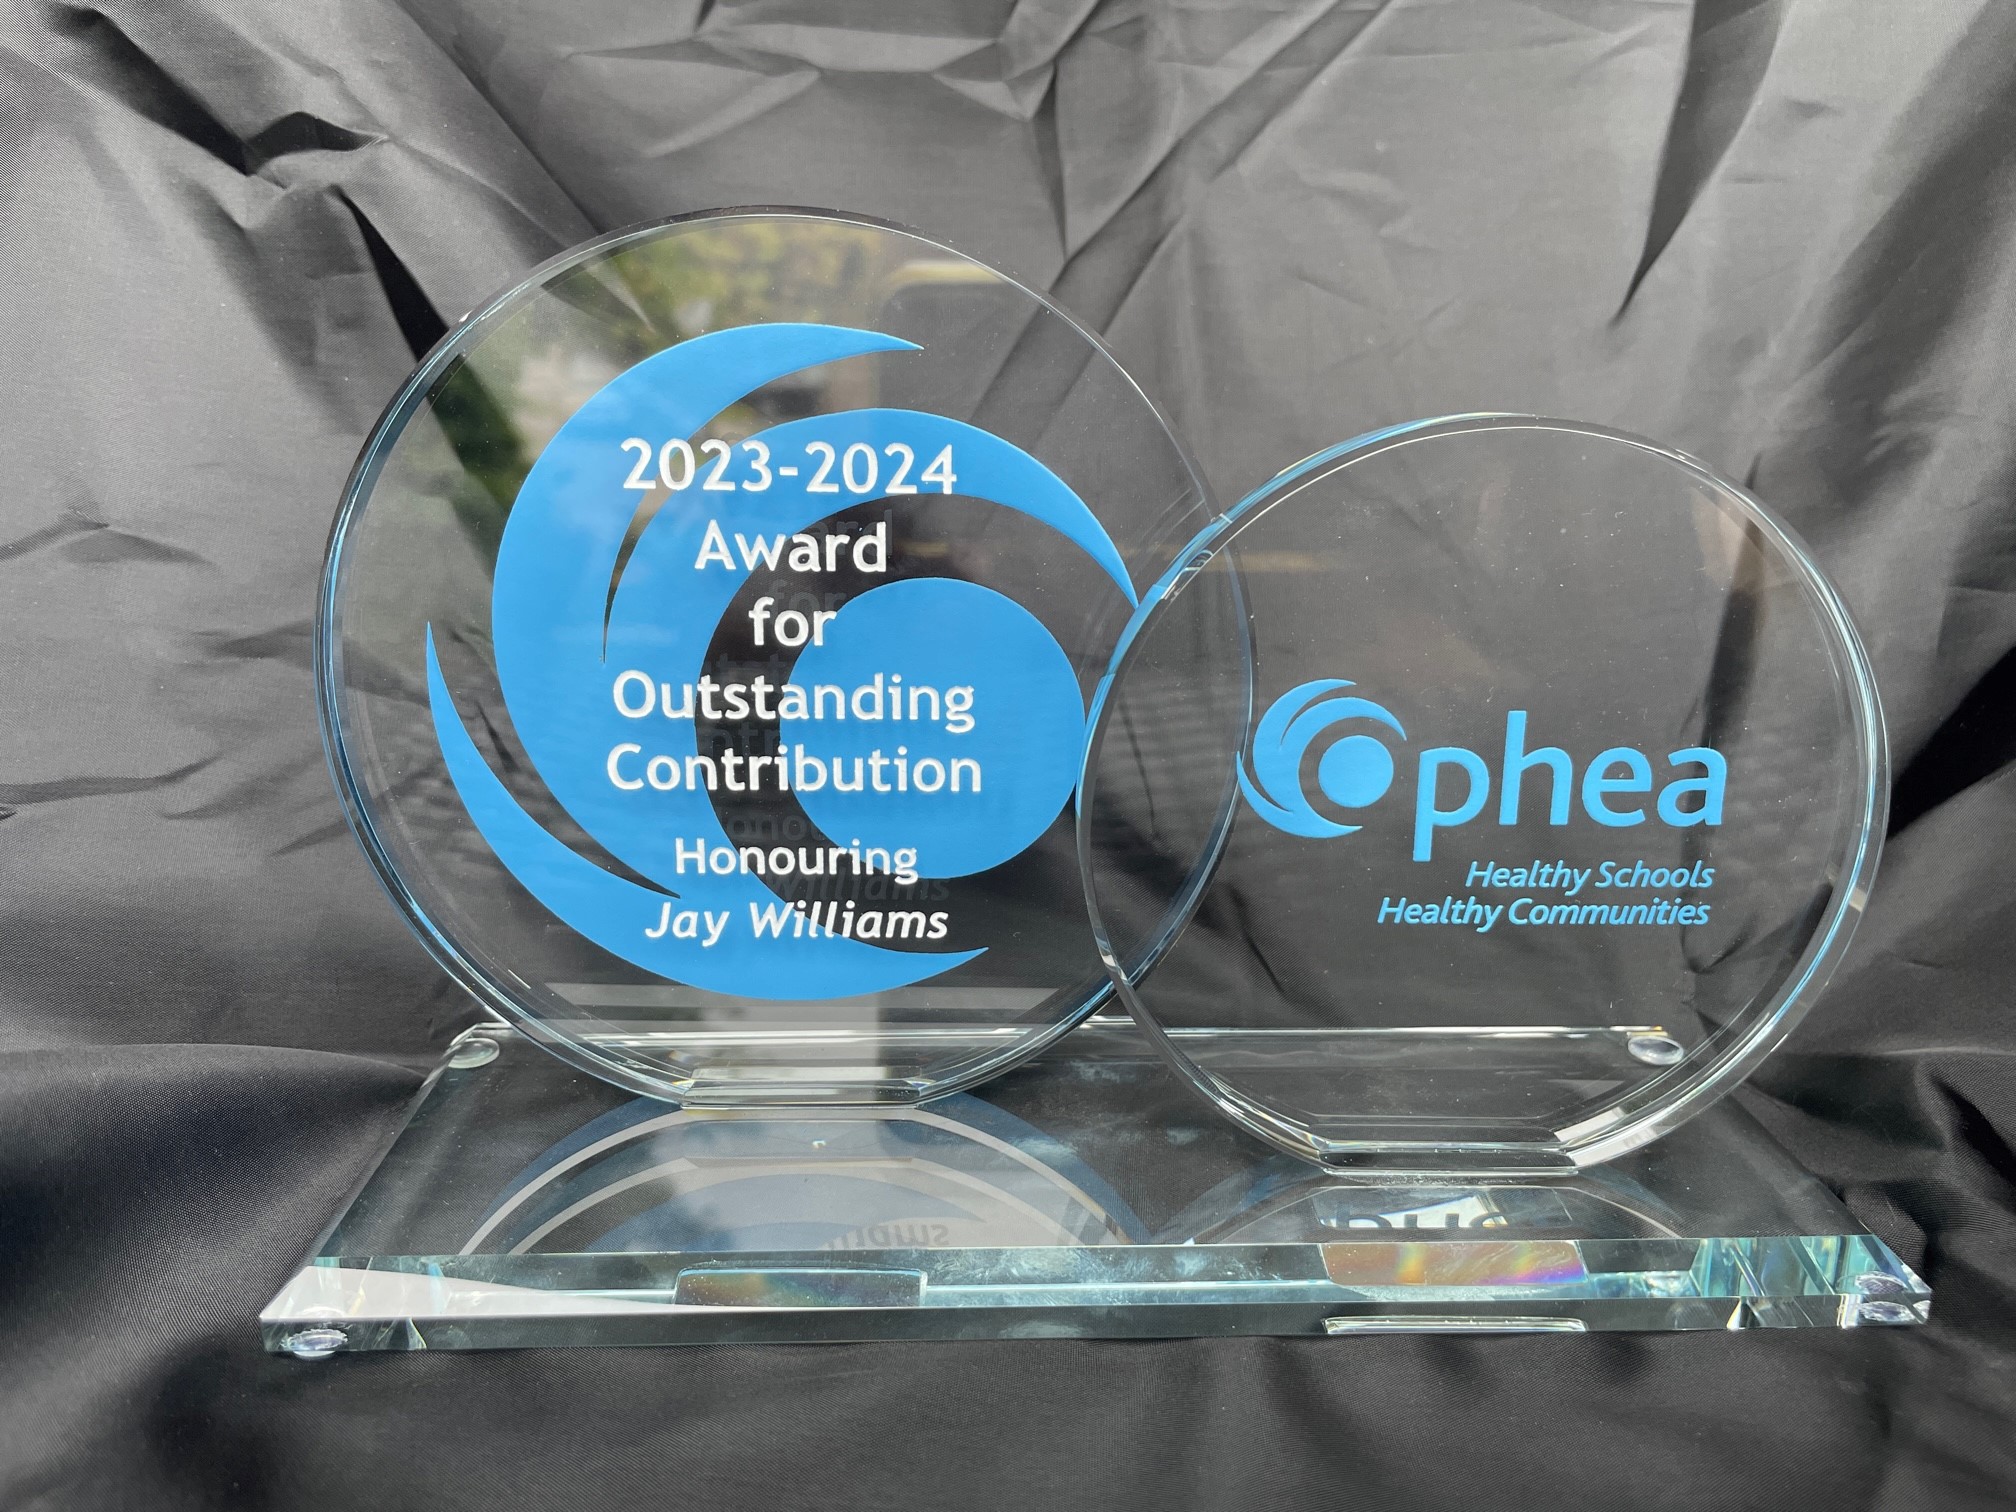 The 2023-2024 Ophea Award for Outstanding Contribution is a clear glass object composed of two circles. The circle on the right bears the text “2023-2024 Award for Outstanding Contribution Honouring Jay Williams” superimposed over Ophea’s “O” logo. The circle on the left is slightly smaller and bears Ophea’s full logo with the tagline “Healthy Schools, Healthy Communities”. 